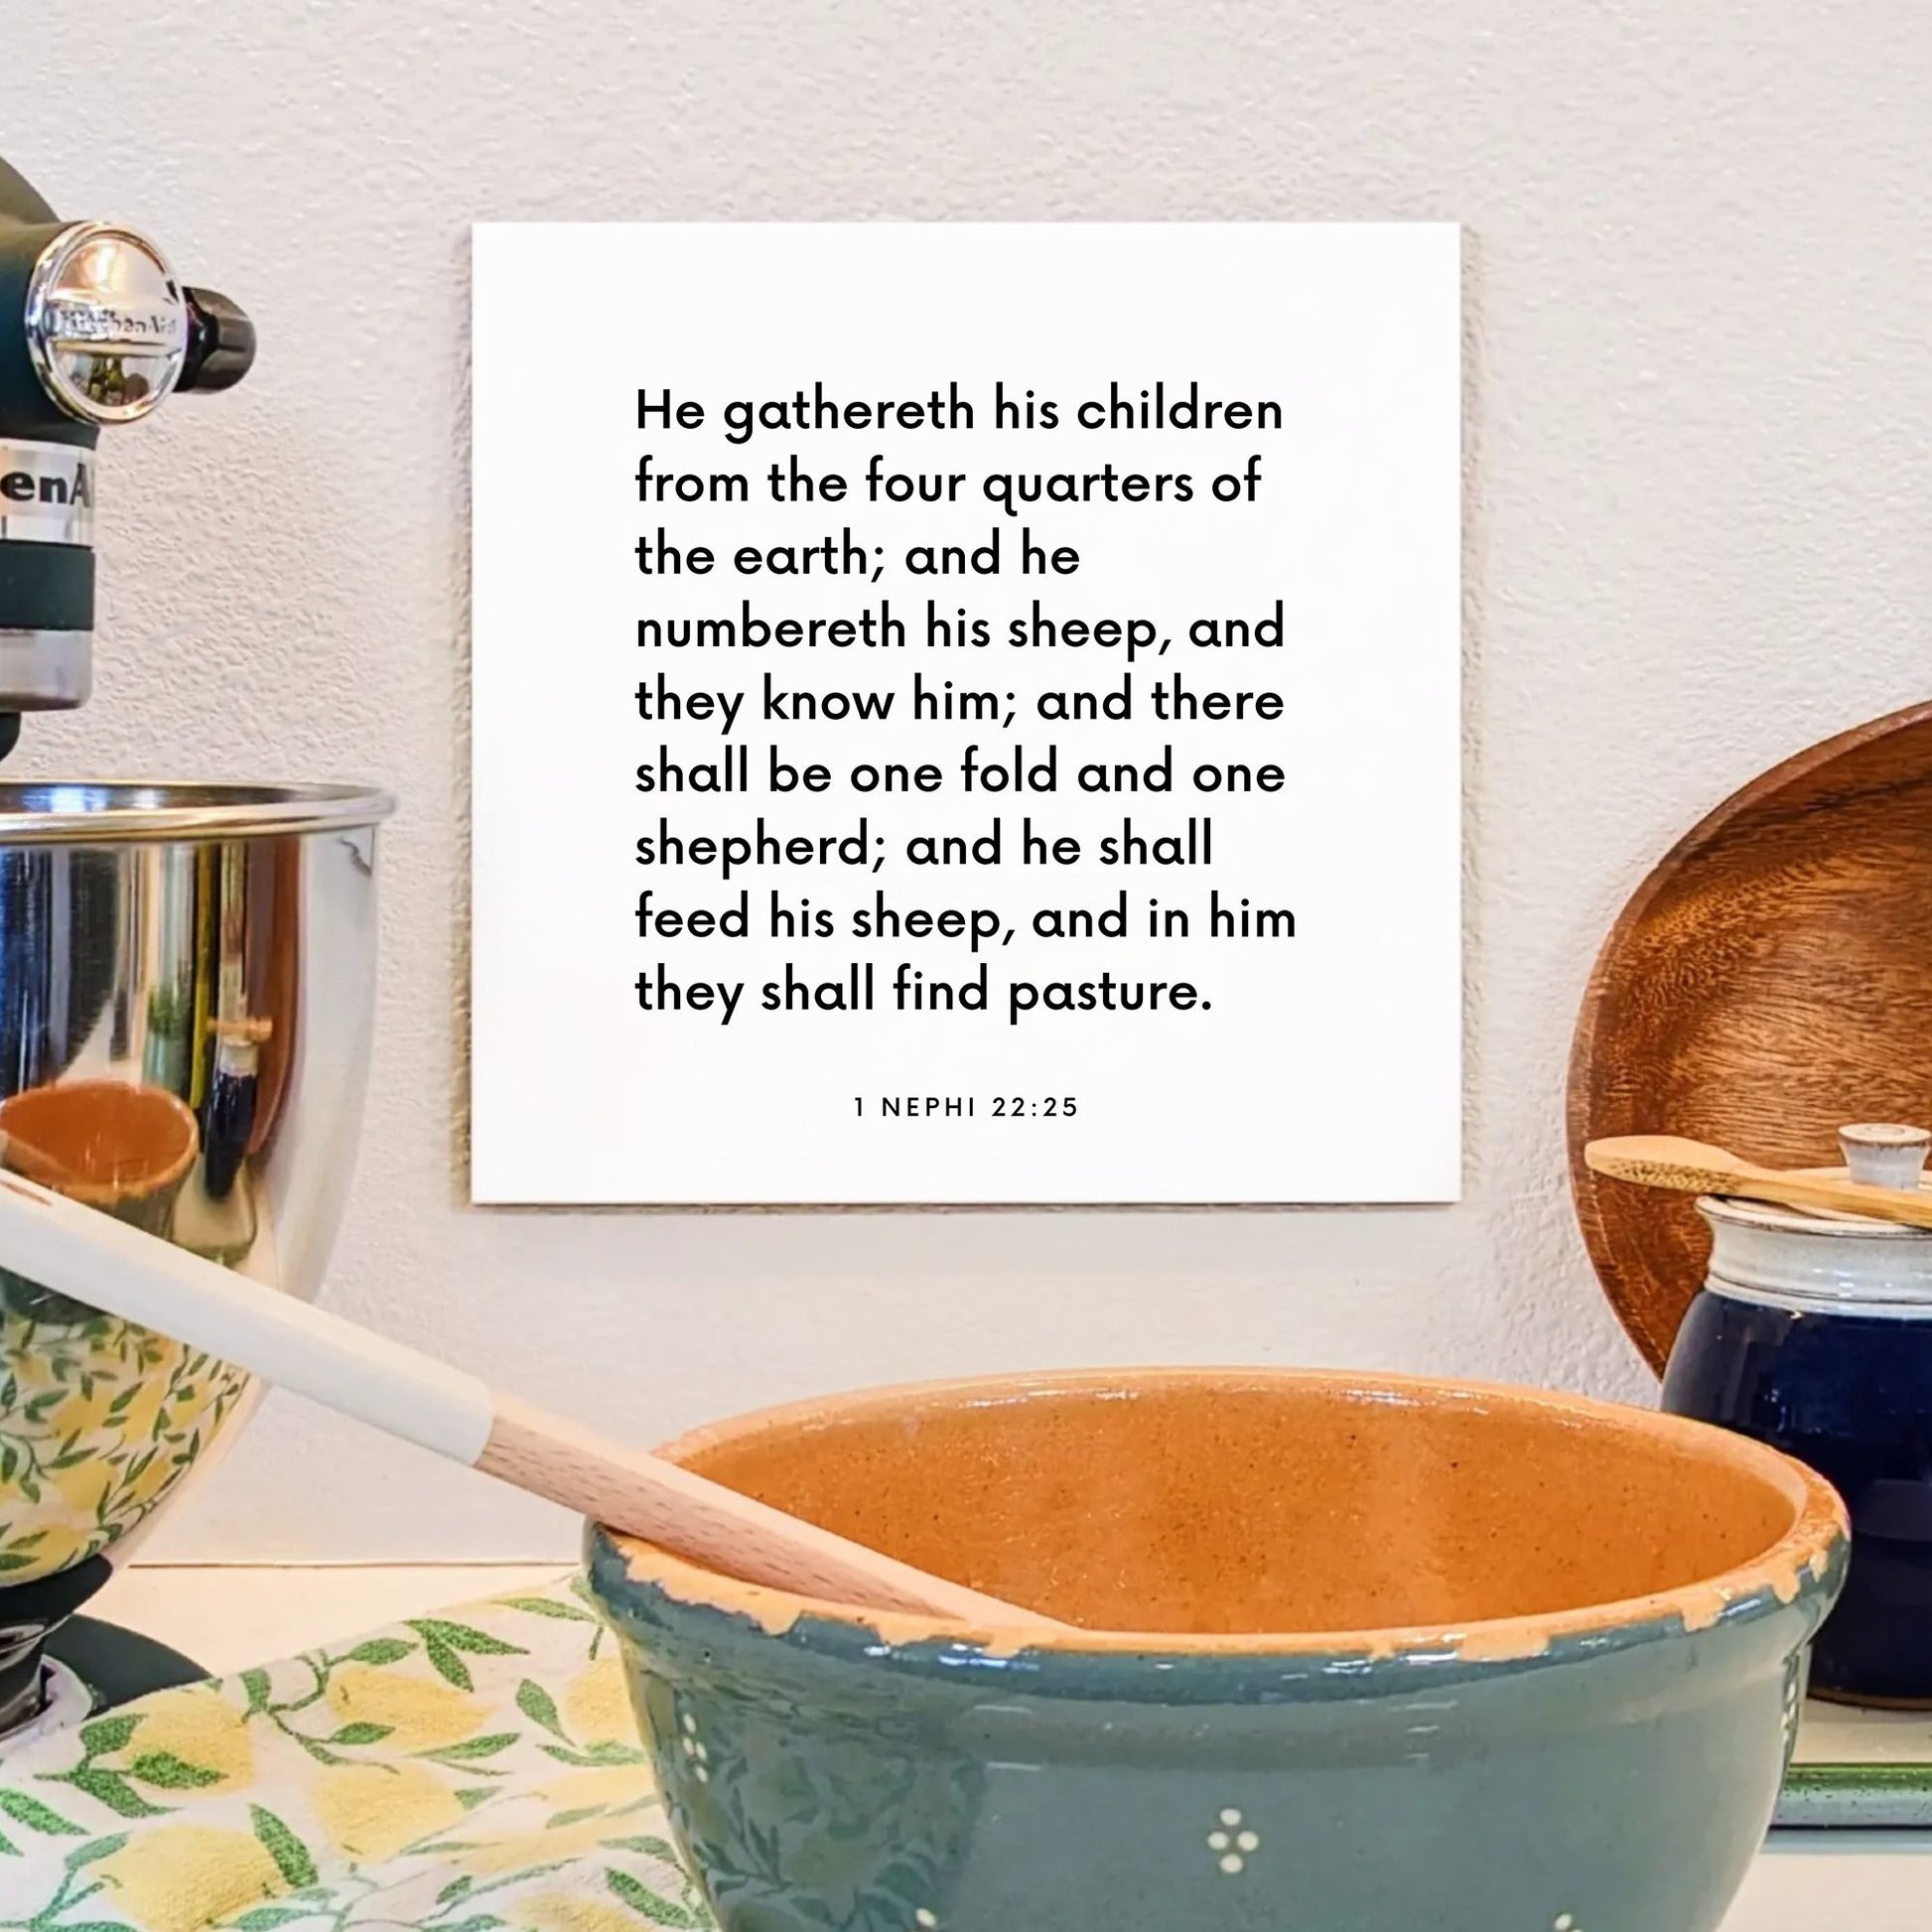 Kitchen mouting of the scripture tile for 1 Nephi 22:25 - "He numbereth his sheep, and they know him"